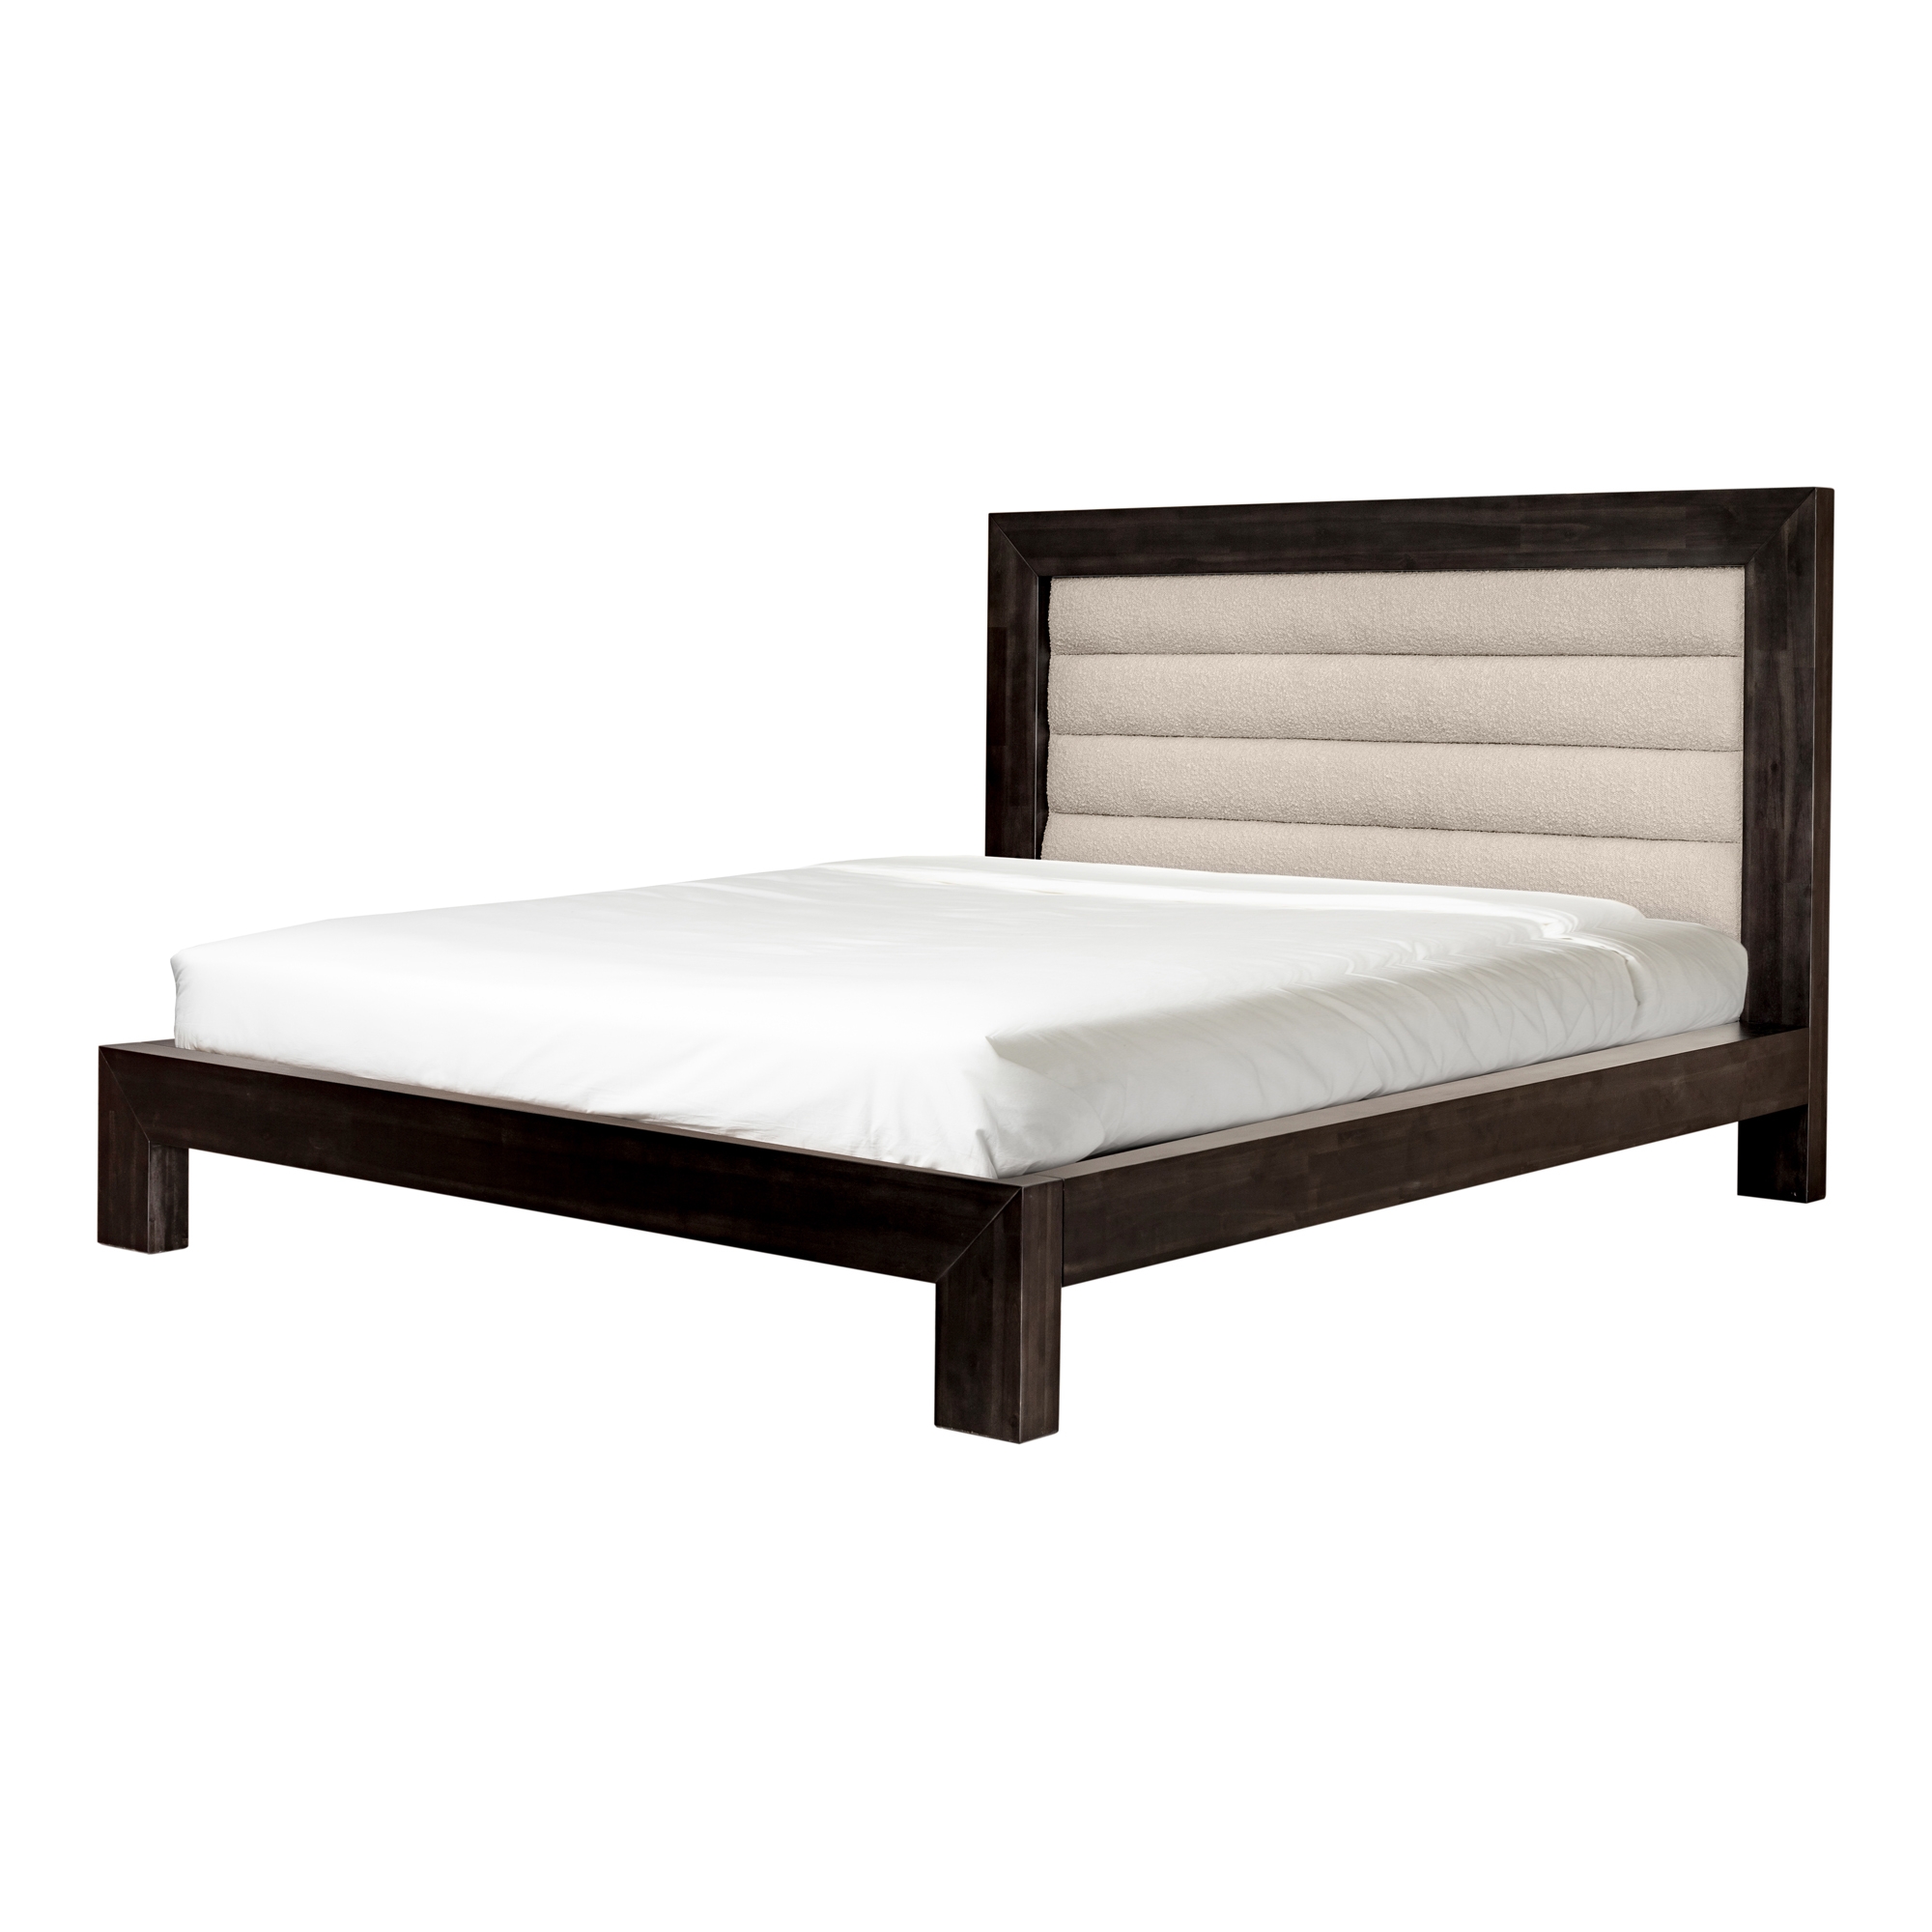 Ashcroft Queen Bed - Image 10